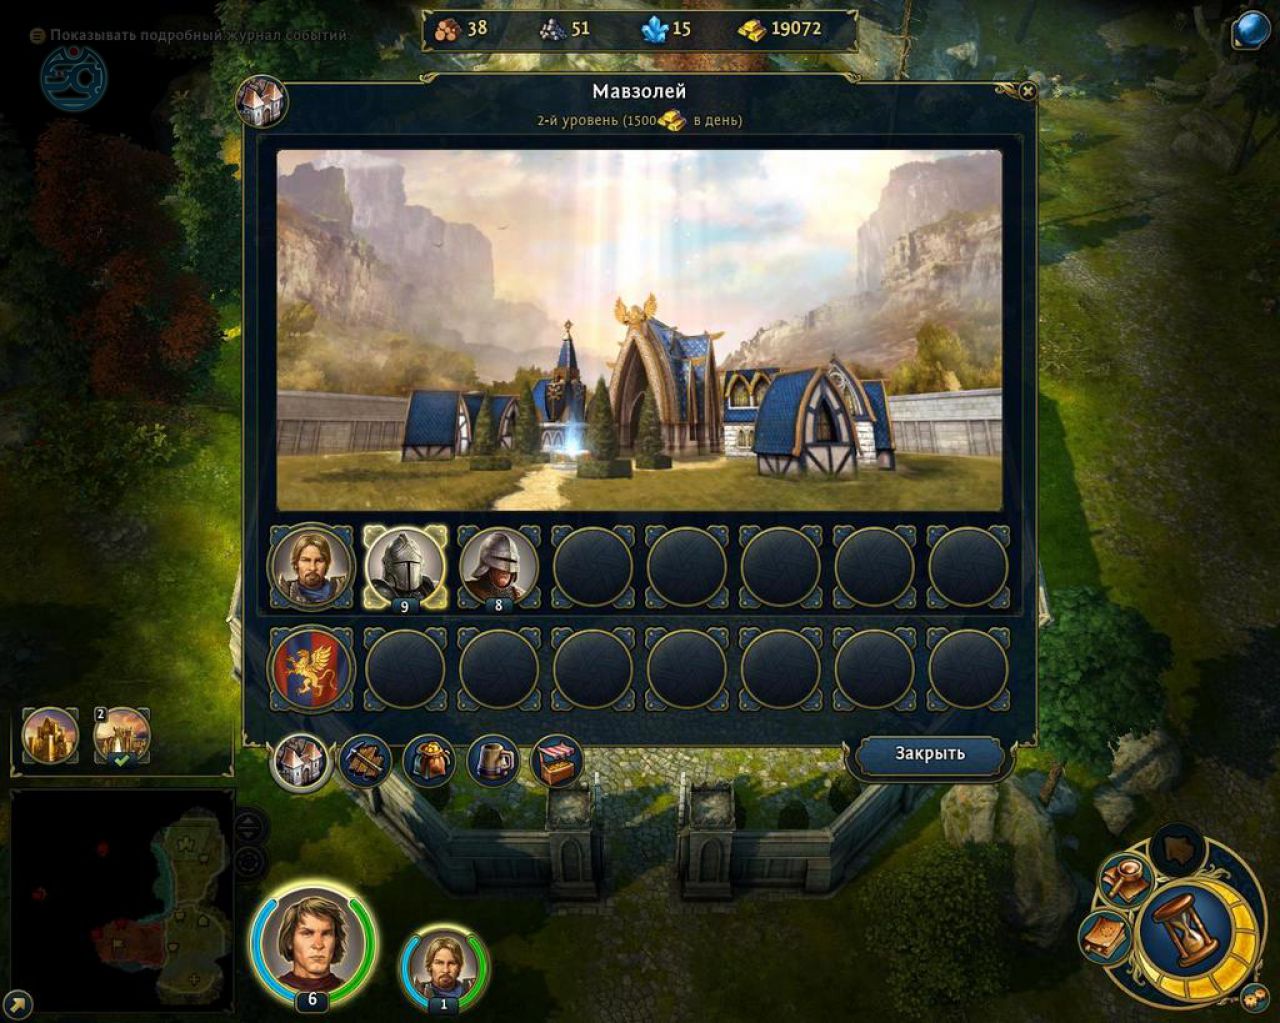 heroes of might and magic 6 download free